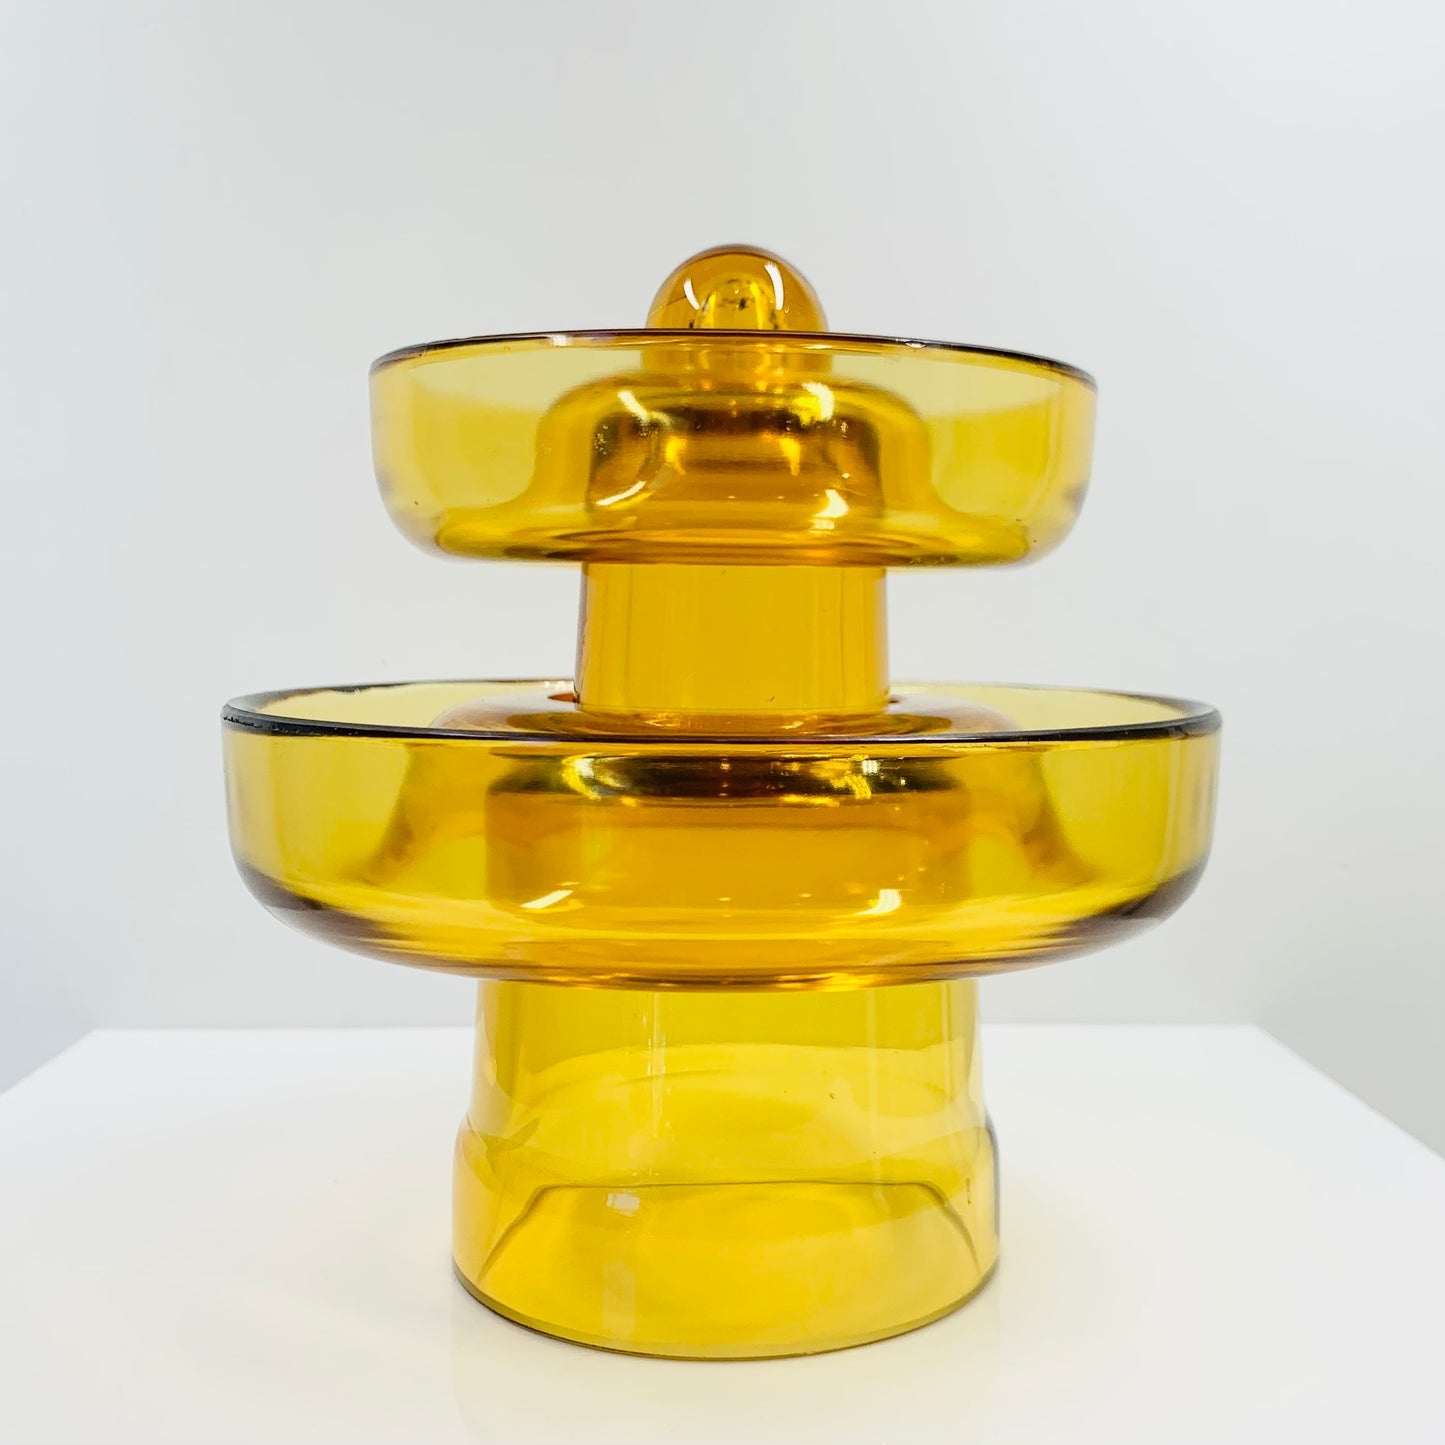 Extremely rare Art Deco amber glass 2 tier float bowl